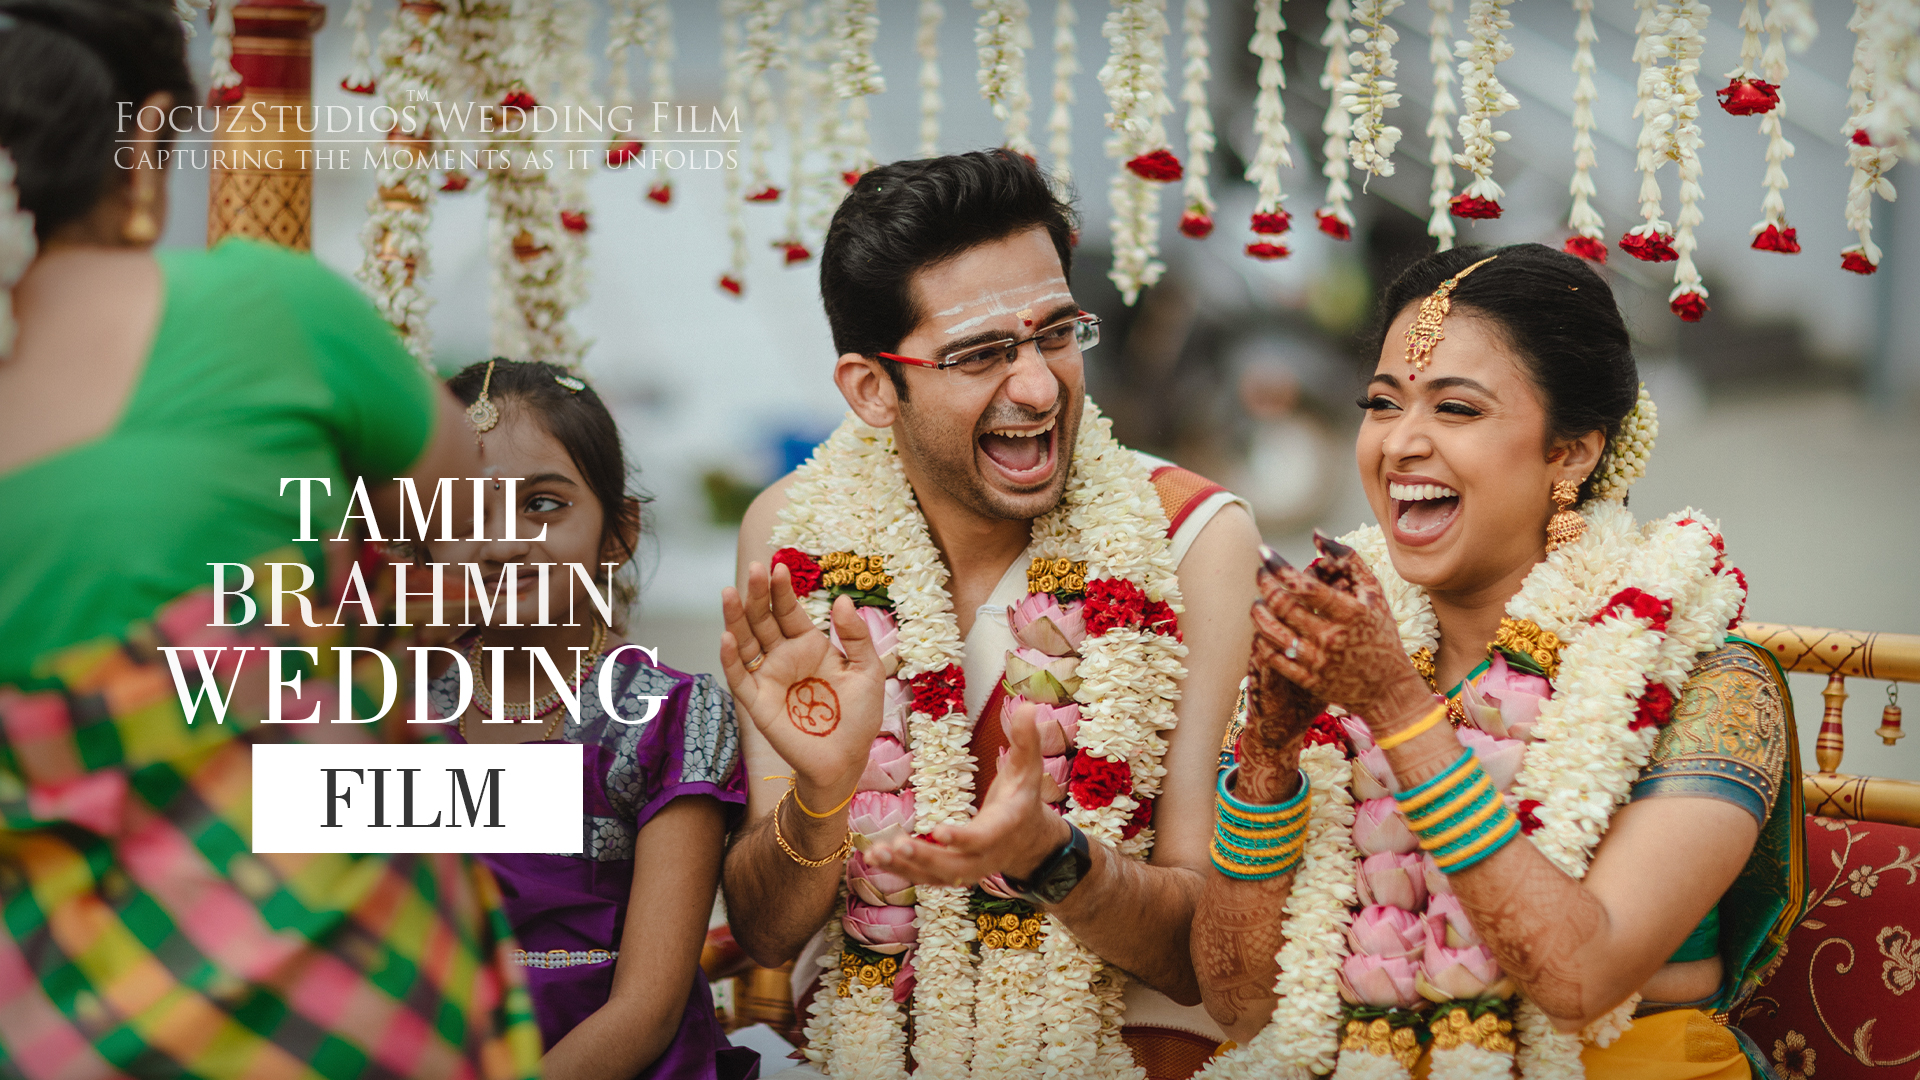 A Blissful Tamil Brahmin Wedding Film Capturing Infinite Happiness & Rich Traditions